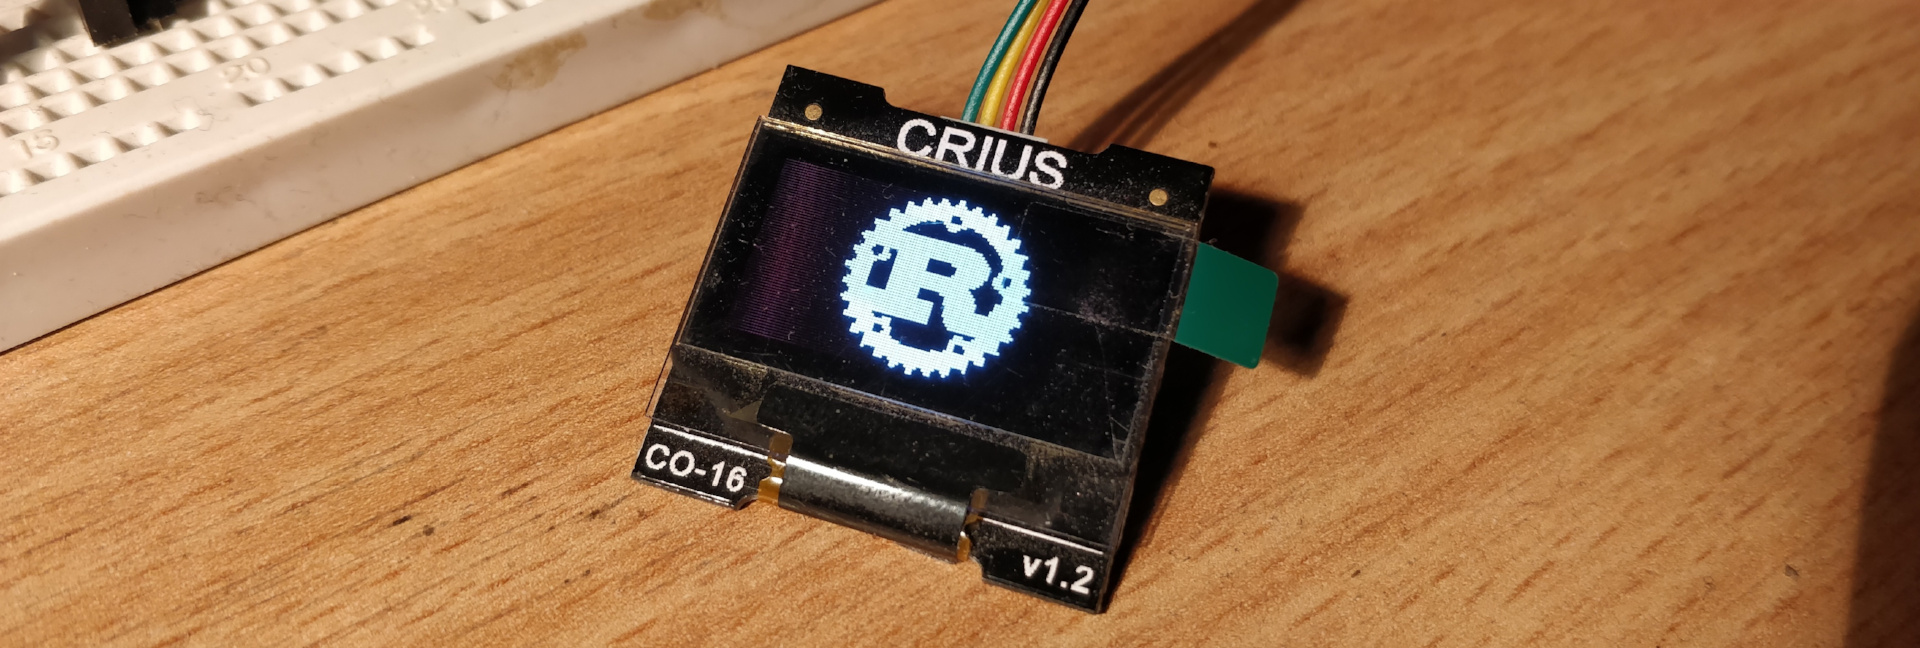 CRIUS display showing the Rust logo